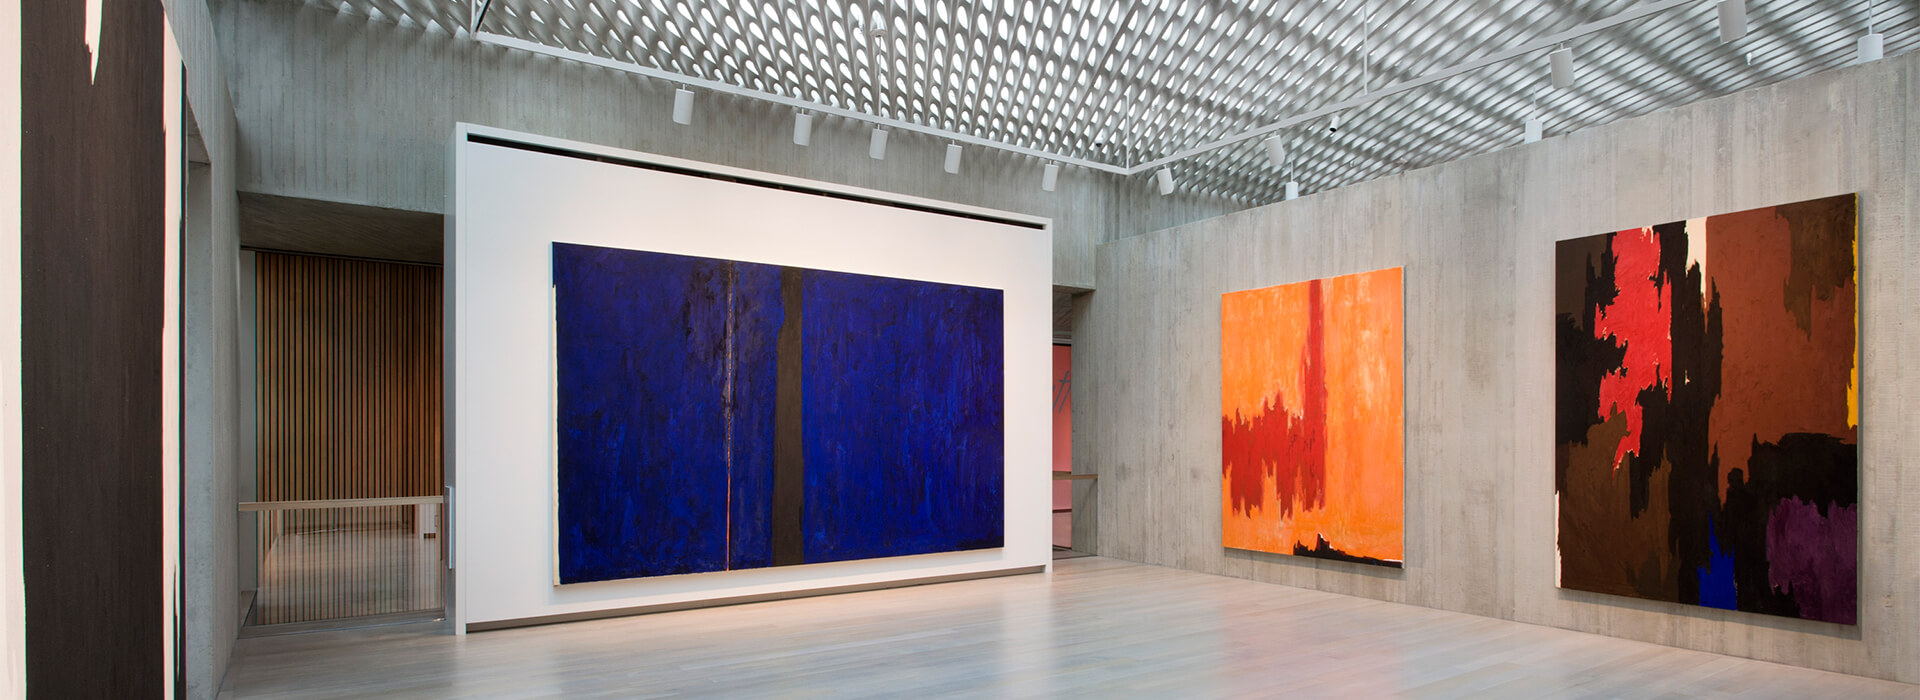 Empty gallery space with large colorful abstract paintings on the walls